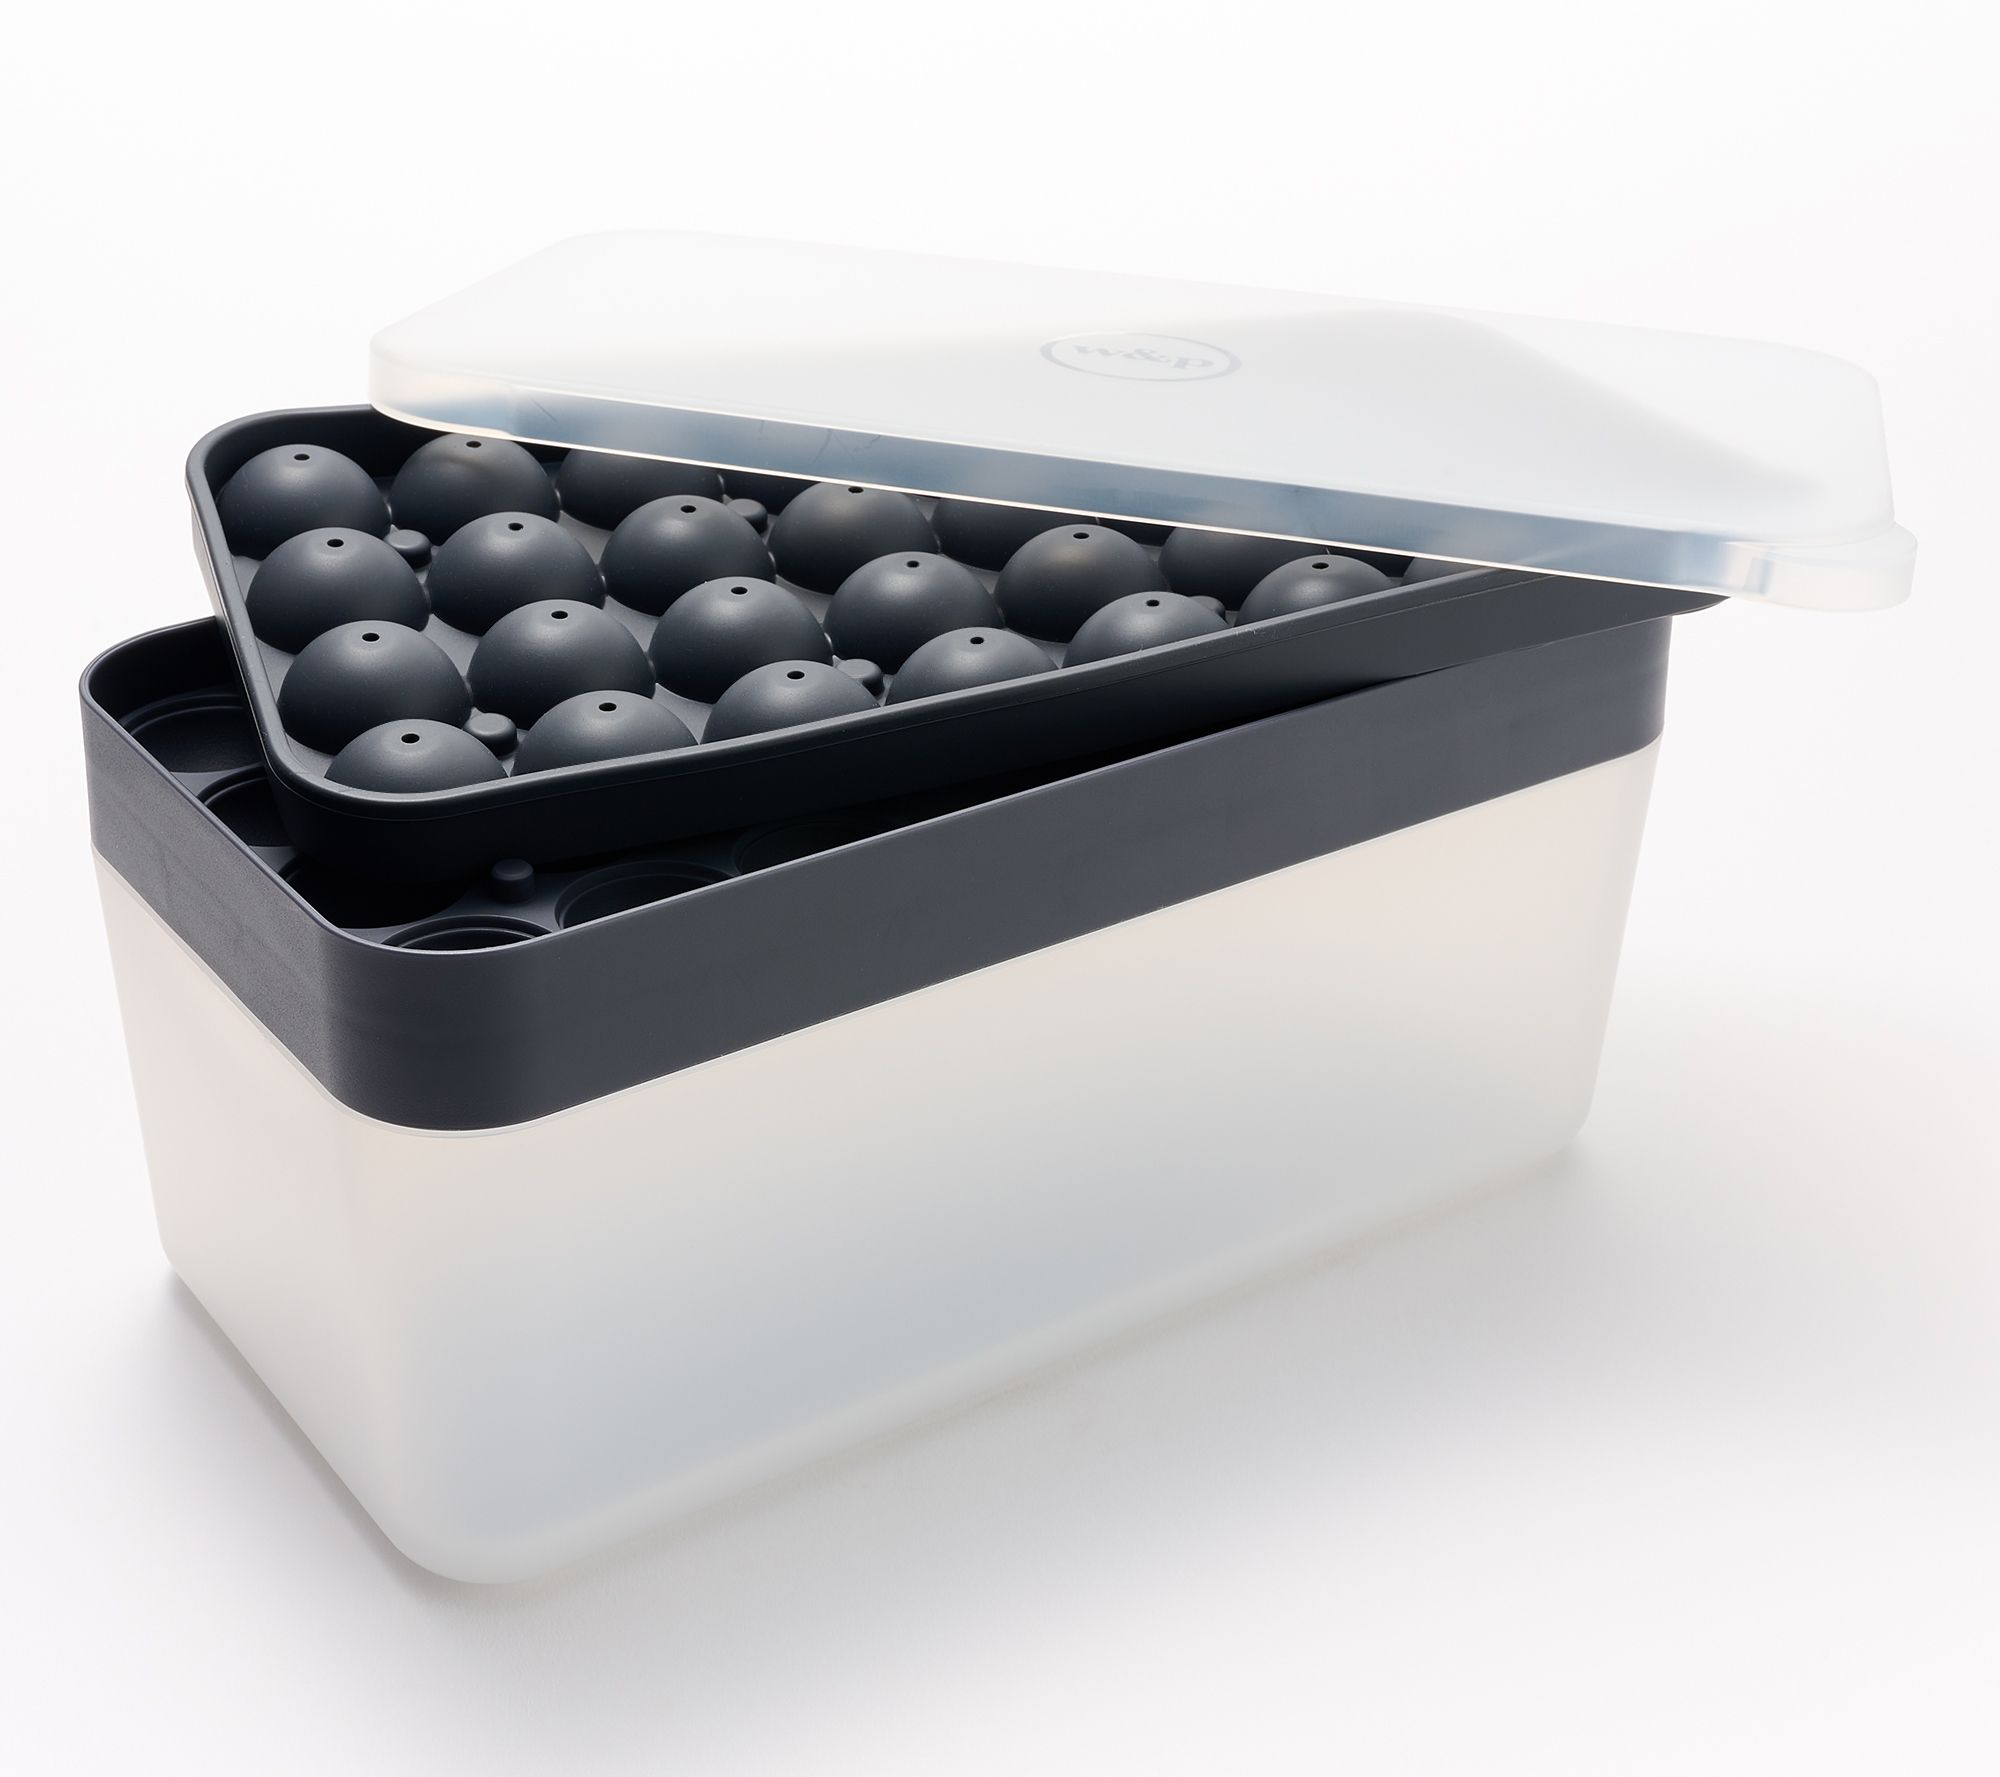 Choice Black Silicone 4 Compartment 2 Sphere Ice Mold